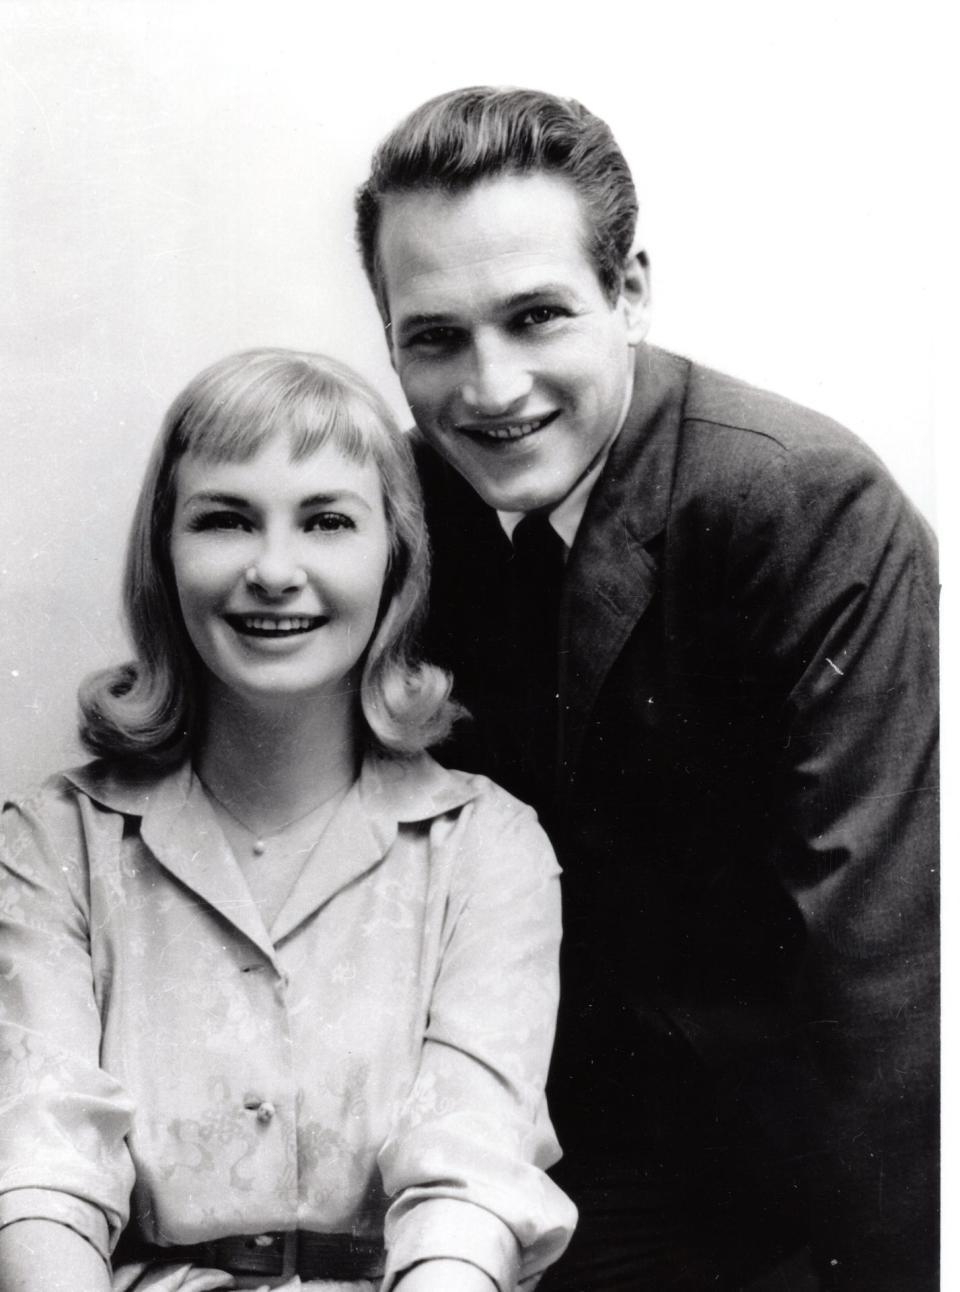 Early photo of Joanne Woodward and Paul Newman, who are profiled in the new HBO Max docuseries "The Last Movie Stars."